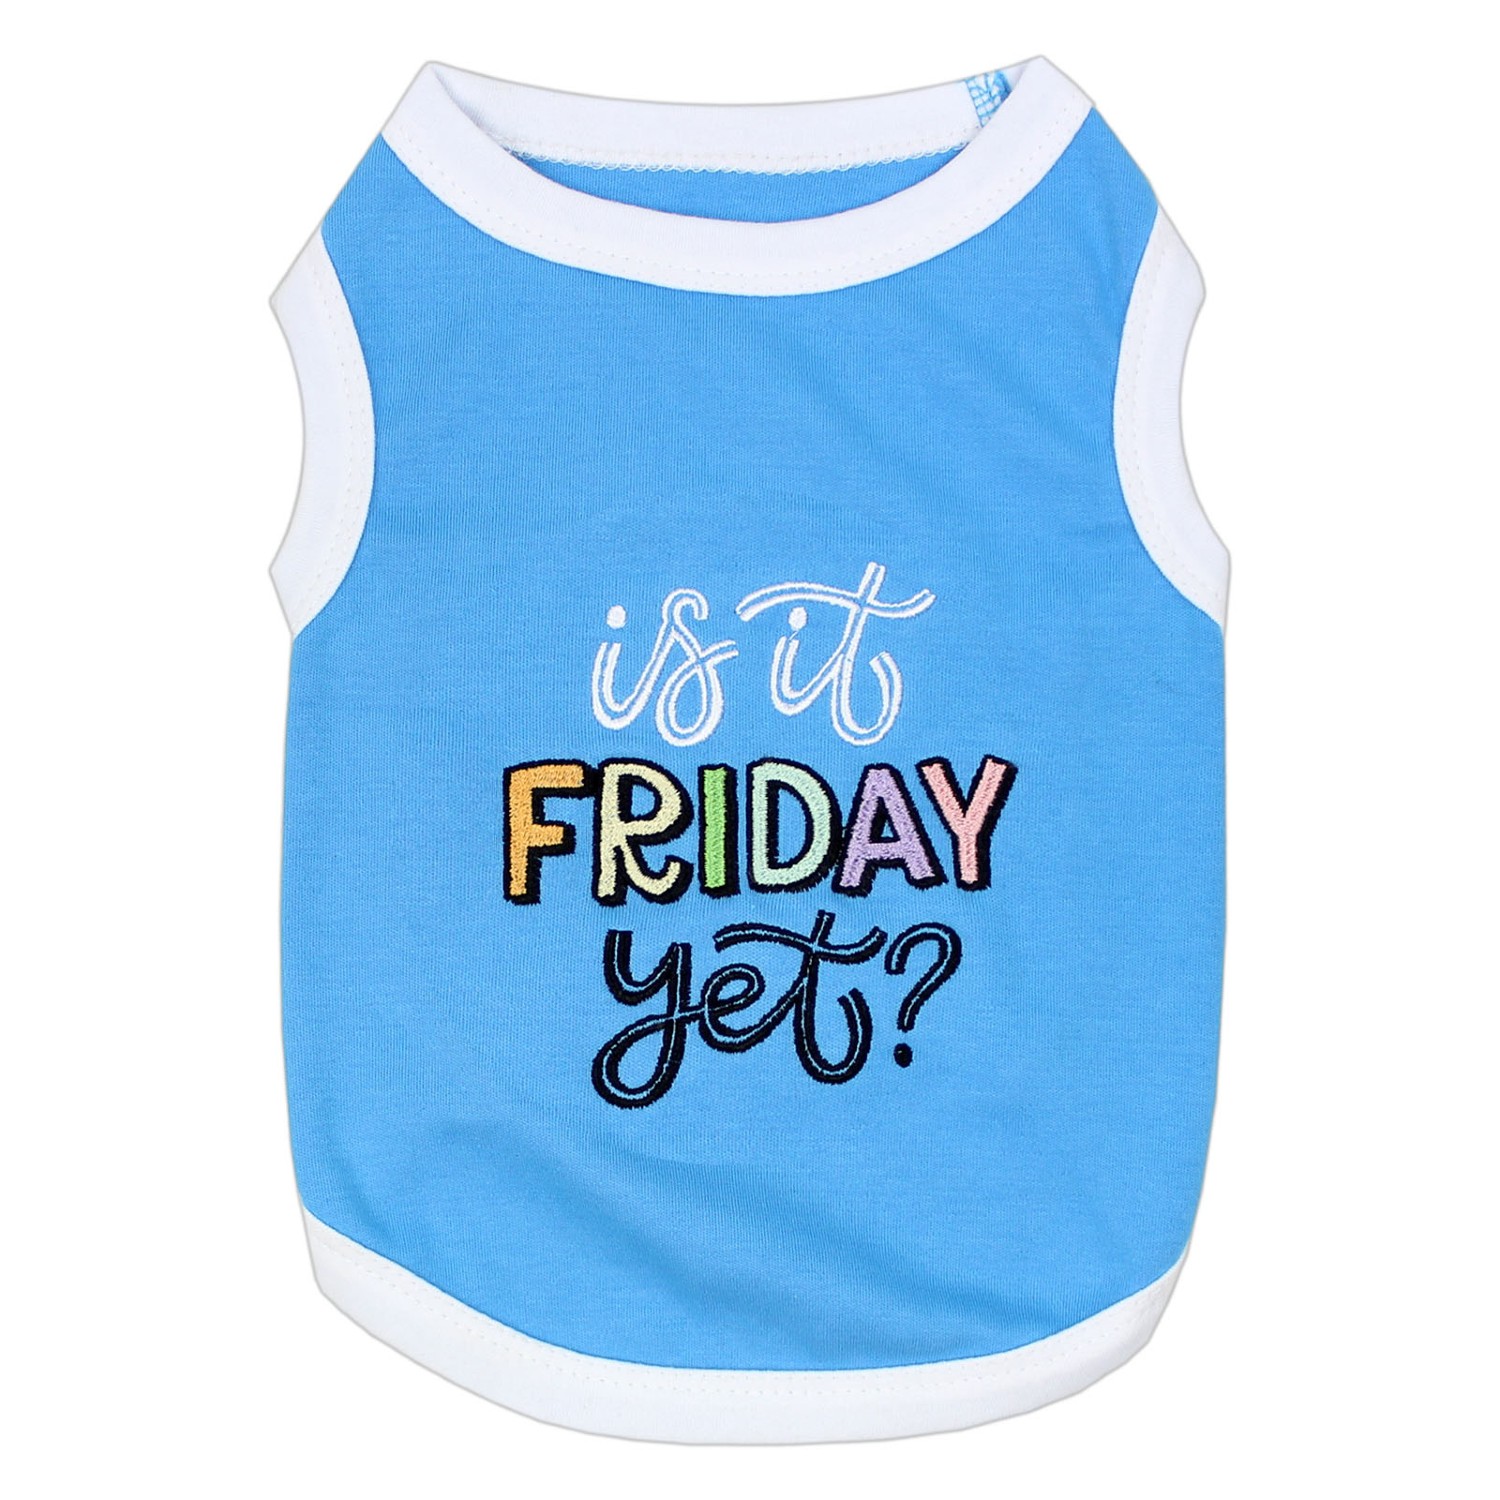 Parisian Pet Is It Friday Yet? Dog Tank - Blue with White Trim